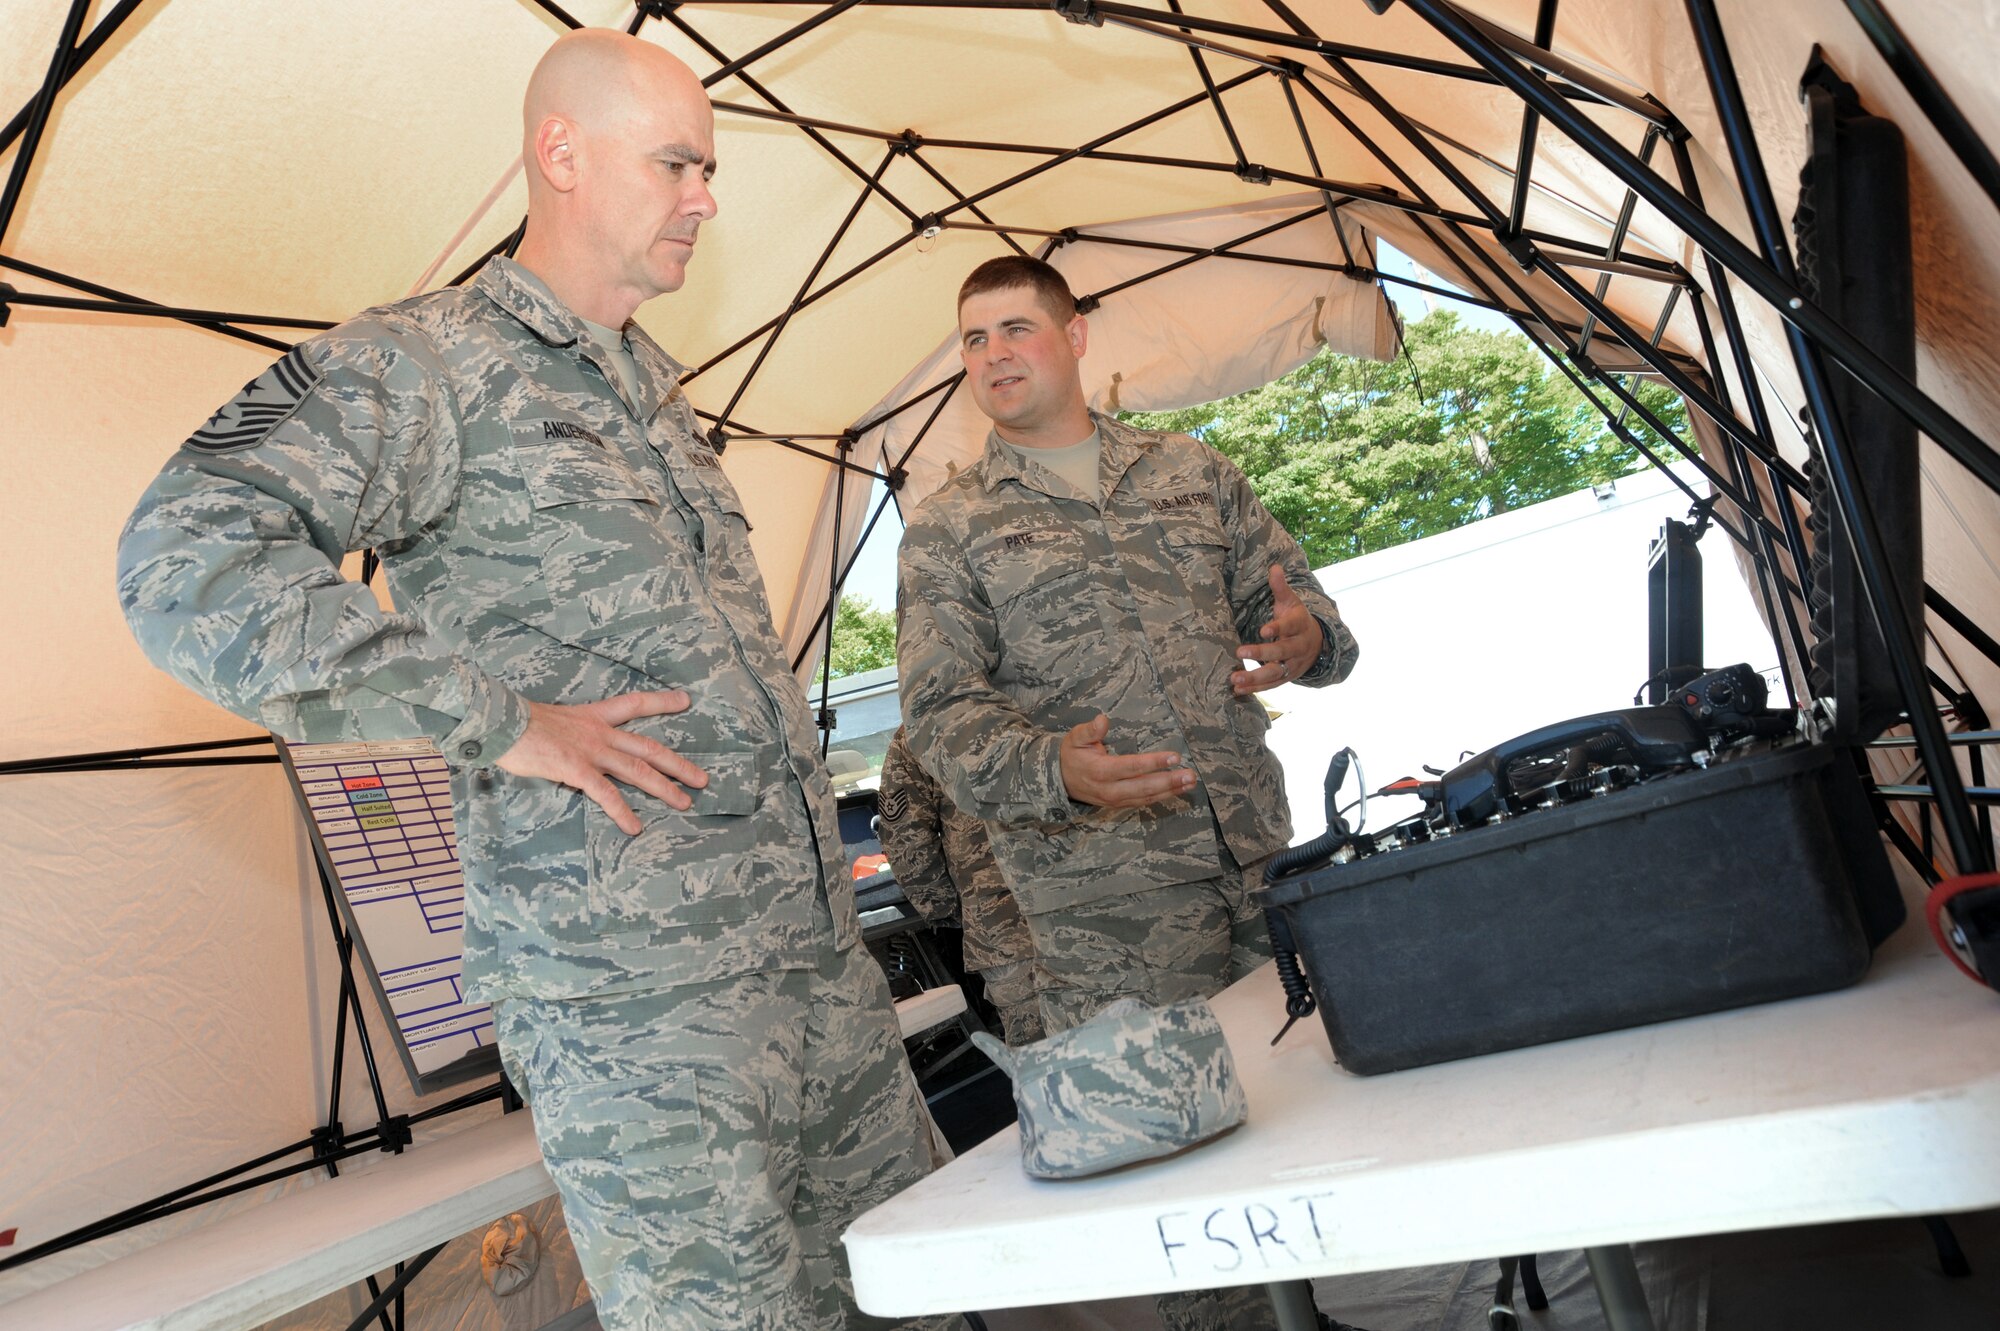 Tech Sgt. Dustin Pate, right, assigned to the 142nd Forces Support Squadron, describes some of the communication equipment used by the Fatality Search and Recovery Team (FSRT) to Ronald C. Anderson Jr., Command Chief Master Sgt., 1st Air Force, left, during his visit to the Portland Air National Guard Base, Ore., June 10, 2014. (Air National Guard photo by Tech. Sgt. John Hughel, 142nd Fighter Wing Public Affairs/Released)